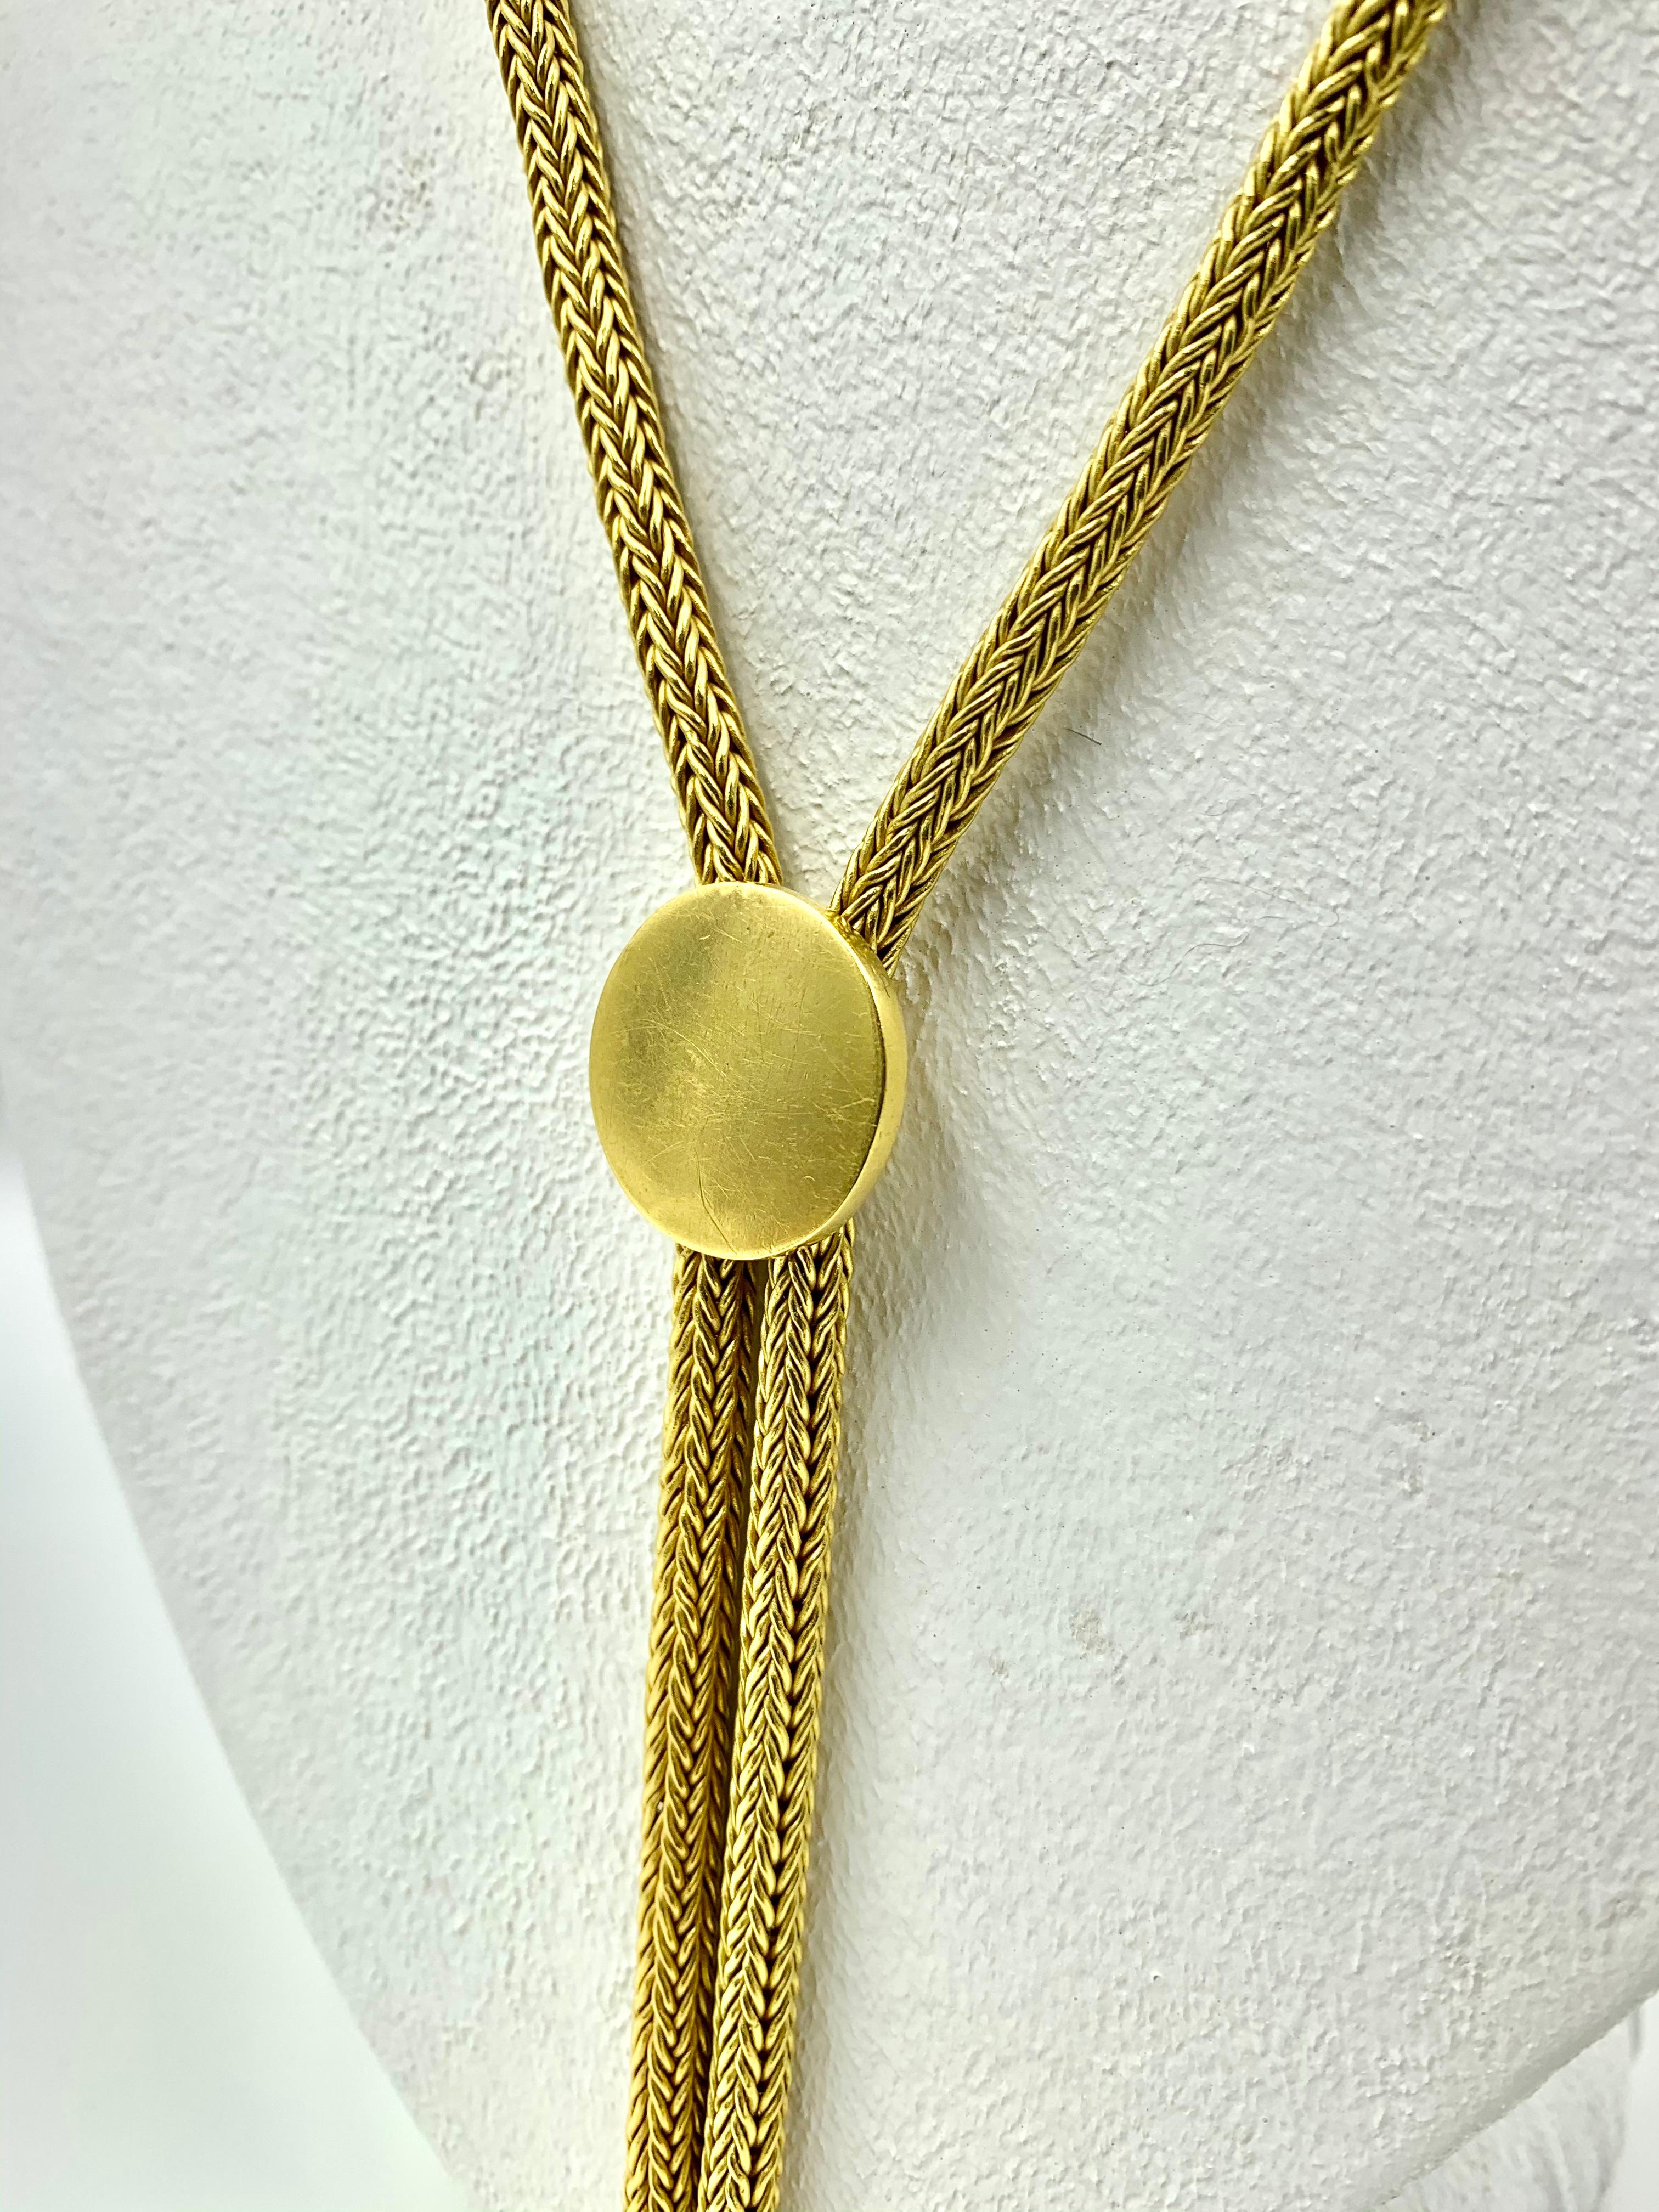 Rare, luxurious 146g 22k gold American classic western style lariat bolo tie necklace by Luna Felix
20th Century
Length: 29.13 inches
Diameter of bolo: 20mm/.79 inches
Weight: 146 grams
Condition: Very Good, beautiful patina with light surface wear